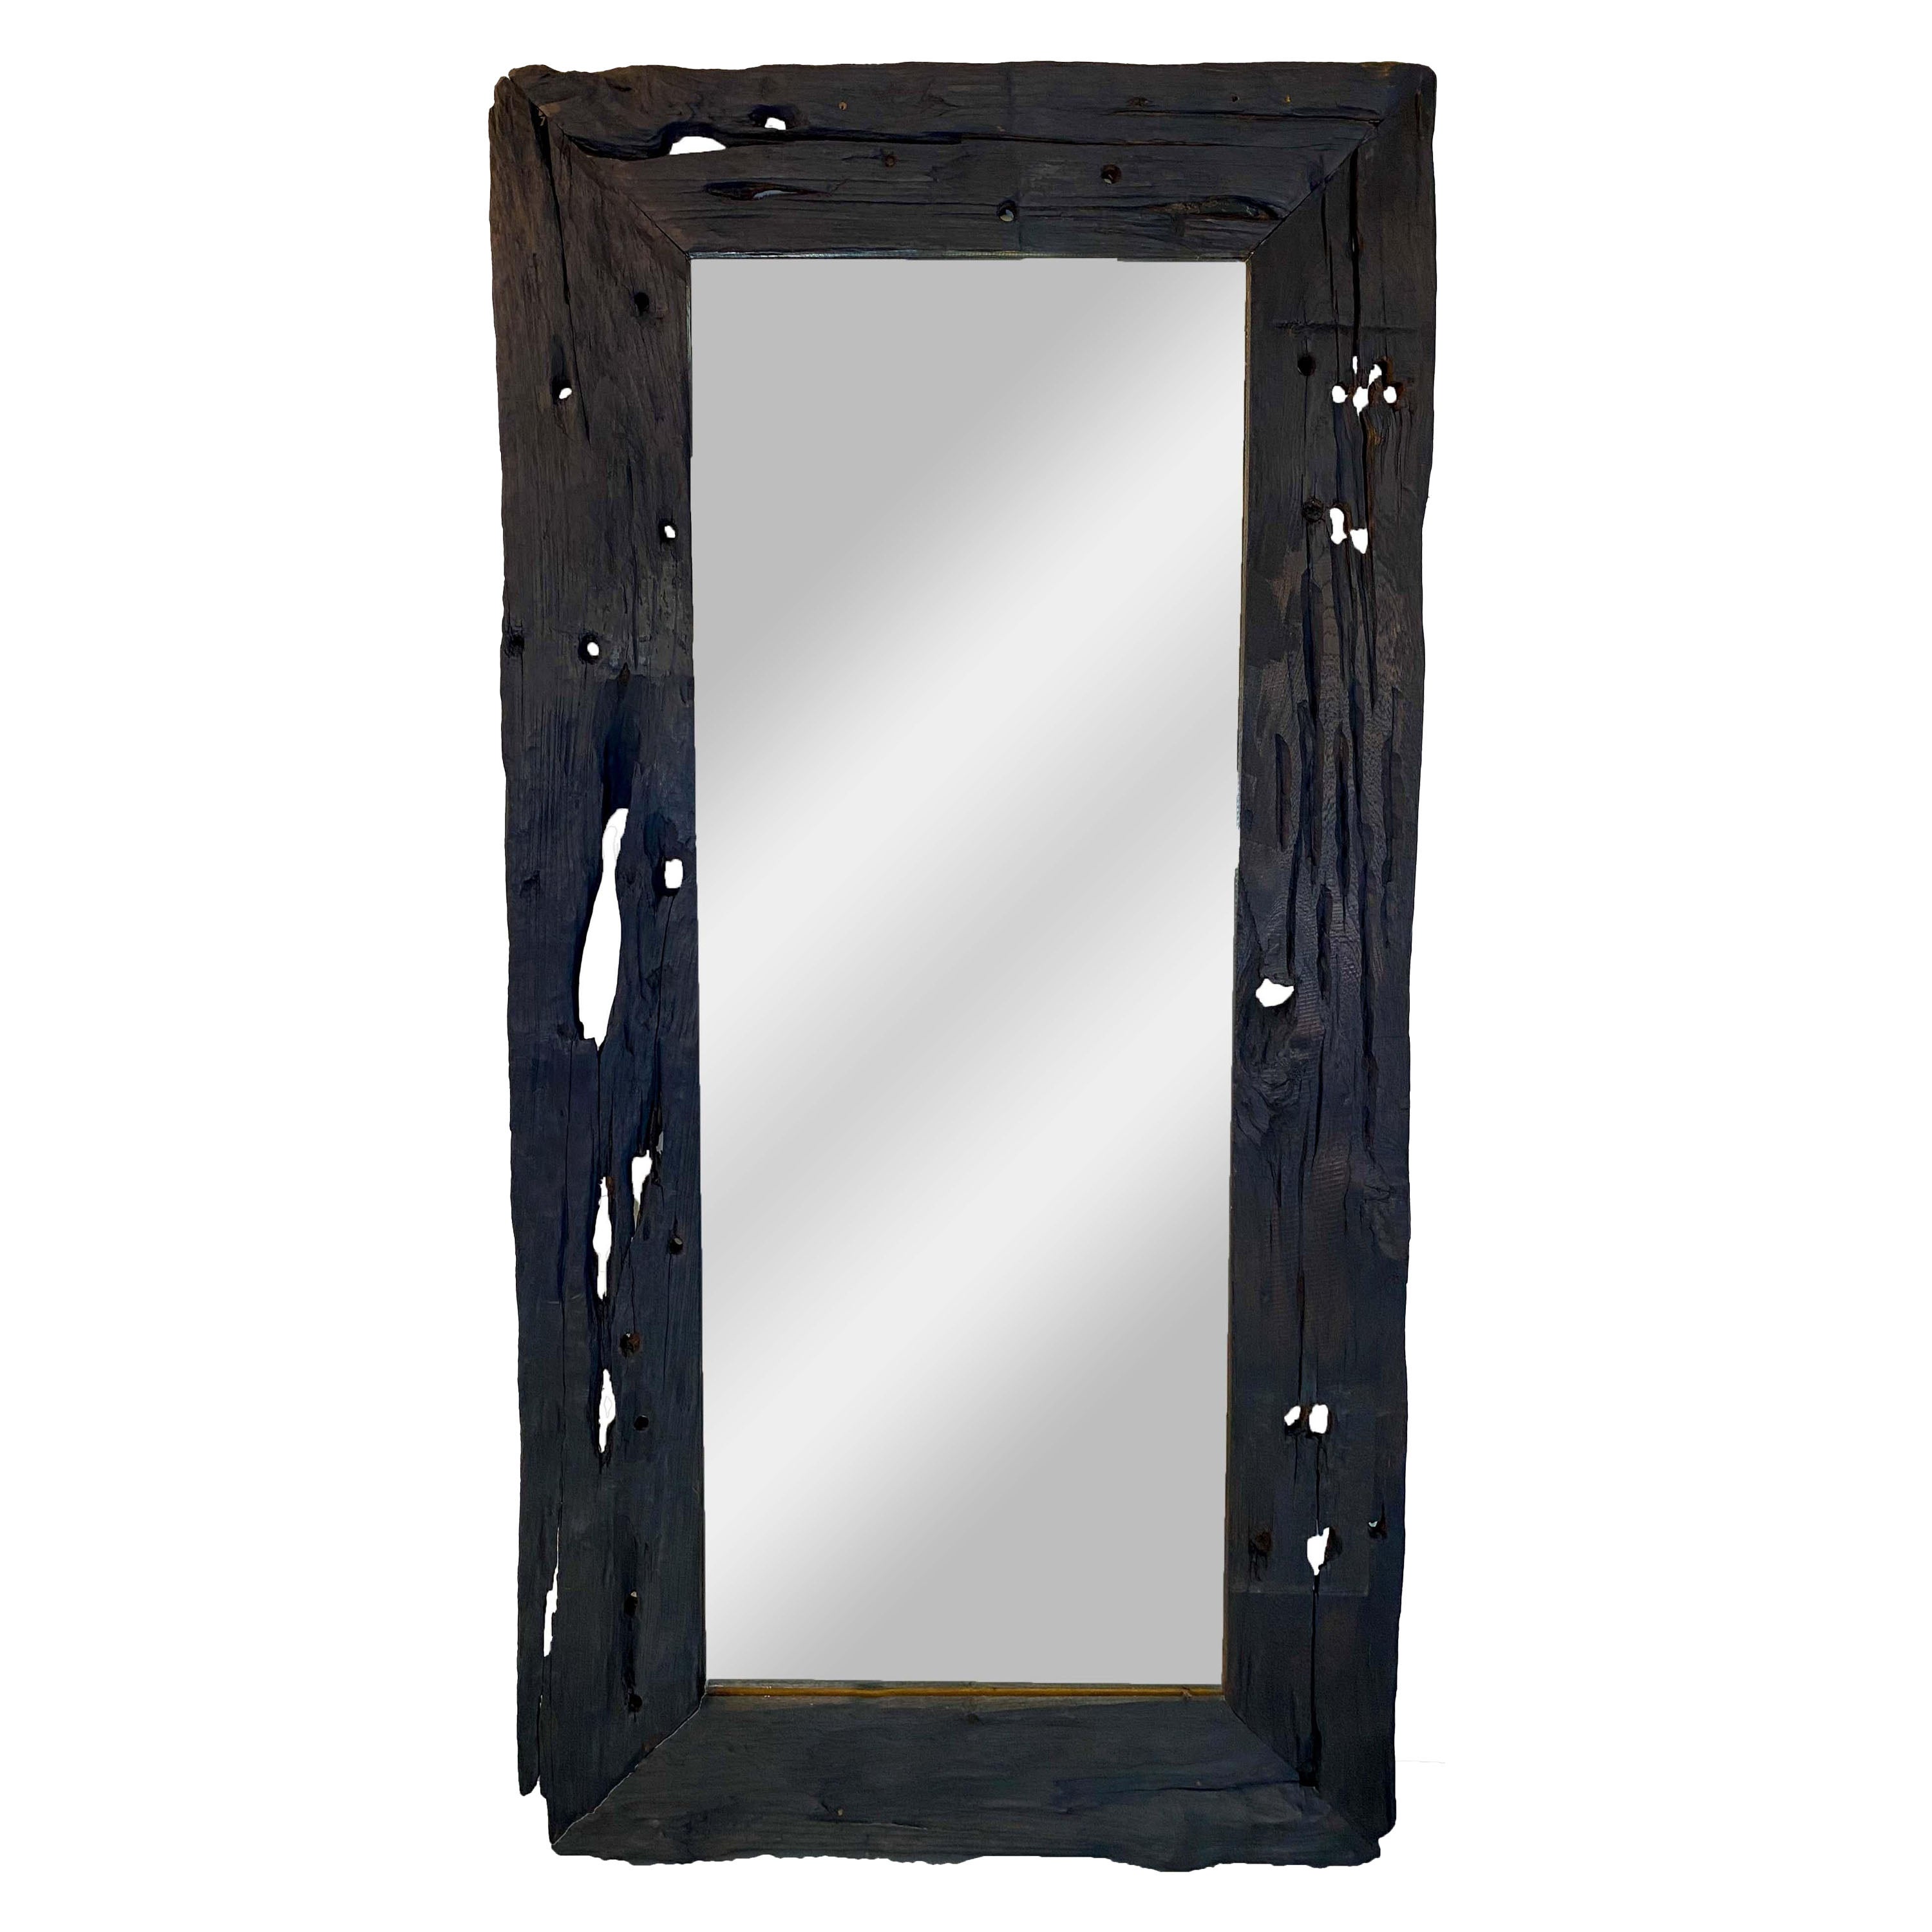 Monumental Modern Rustic Style Hand carved Wooden Black Frame Floor Mirror For Sale